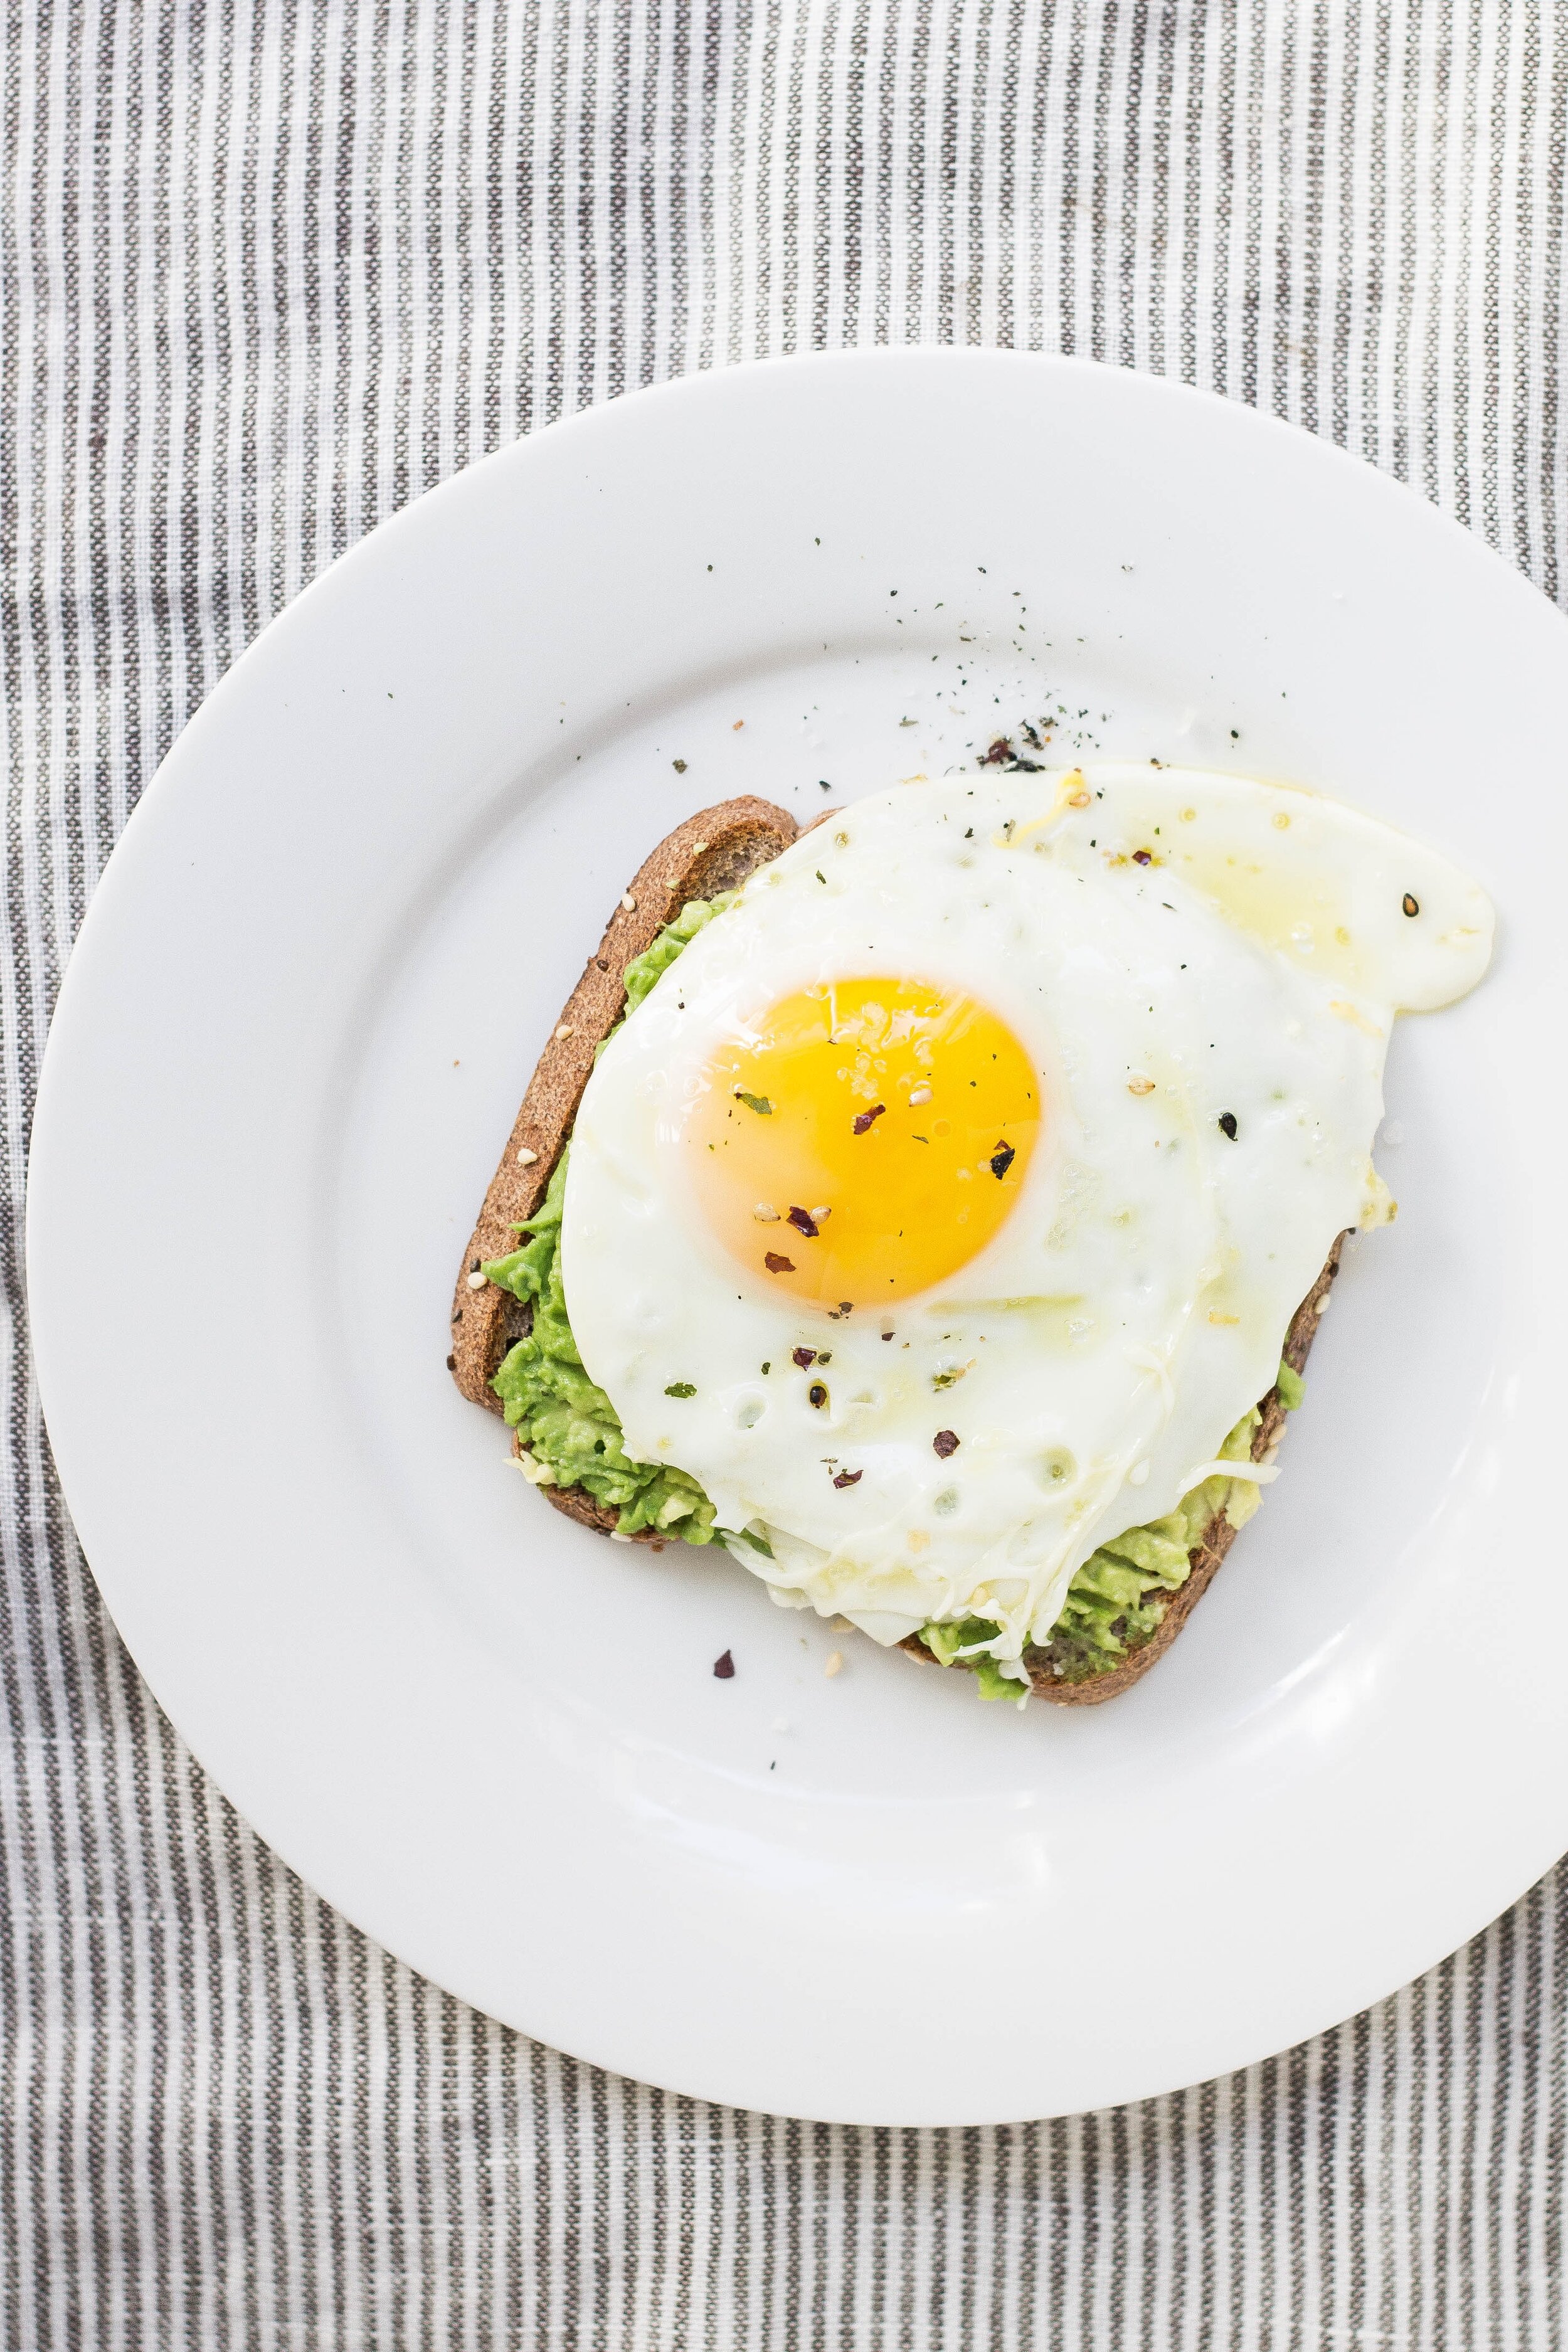 Eggs & Cancer Risk | Wholesome LLC